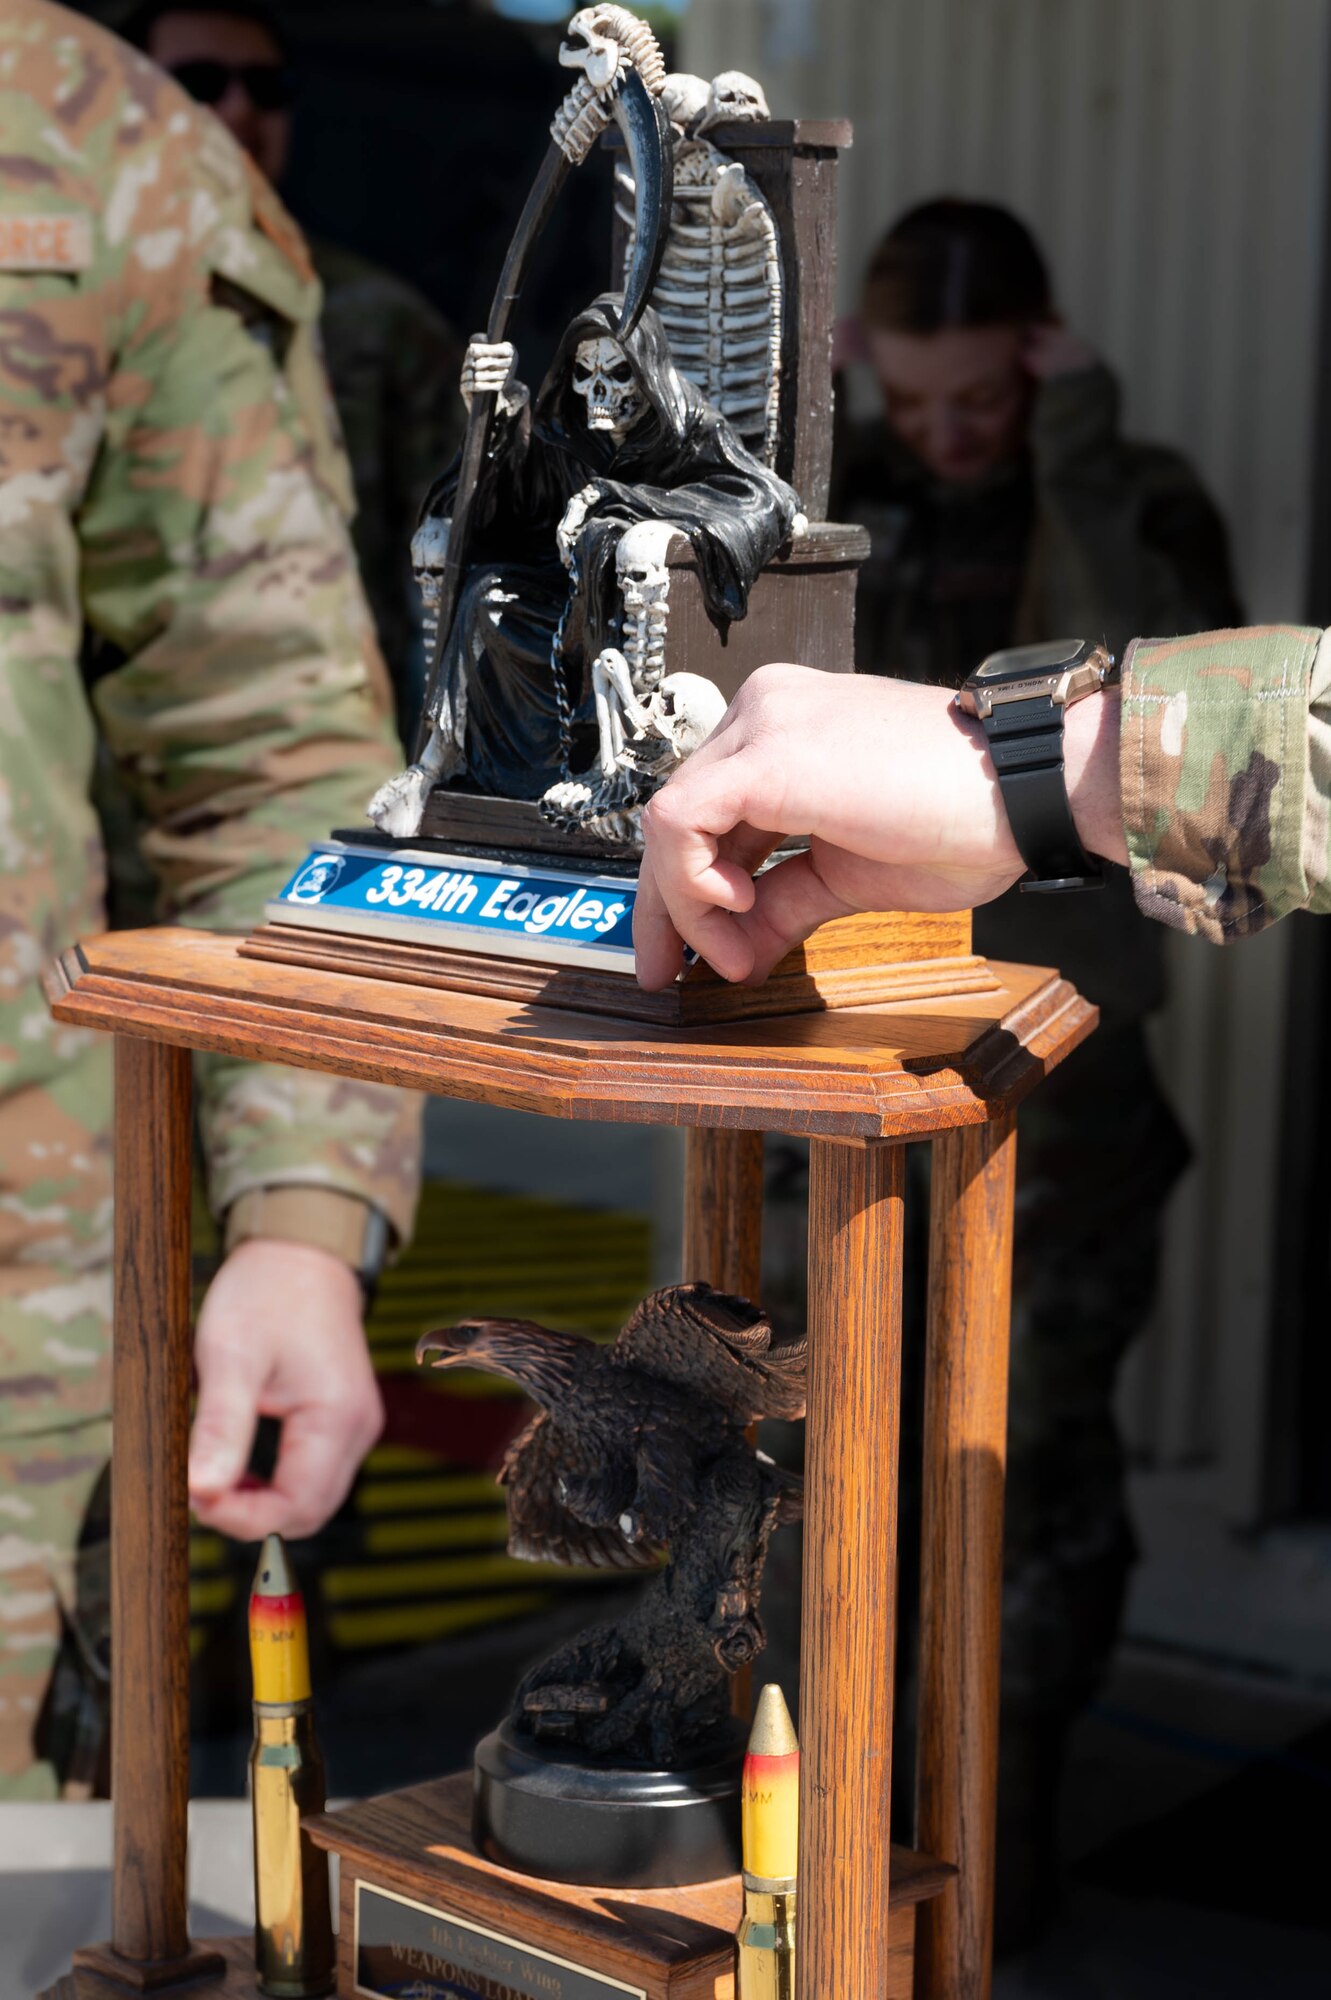 334th Fighter Squadron plaque being placed on the trophy during a quarterly load crew competition at Seymour Johnson Air Force Base, North Carolina, April 5, 2024. Load crew competitions are a friendly competition between the 4th Fighter Wing’s fighter generation squadrons. (U.S. Air Force photo by Airman 1st Class Rebecca Sirimarco-Lang)